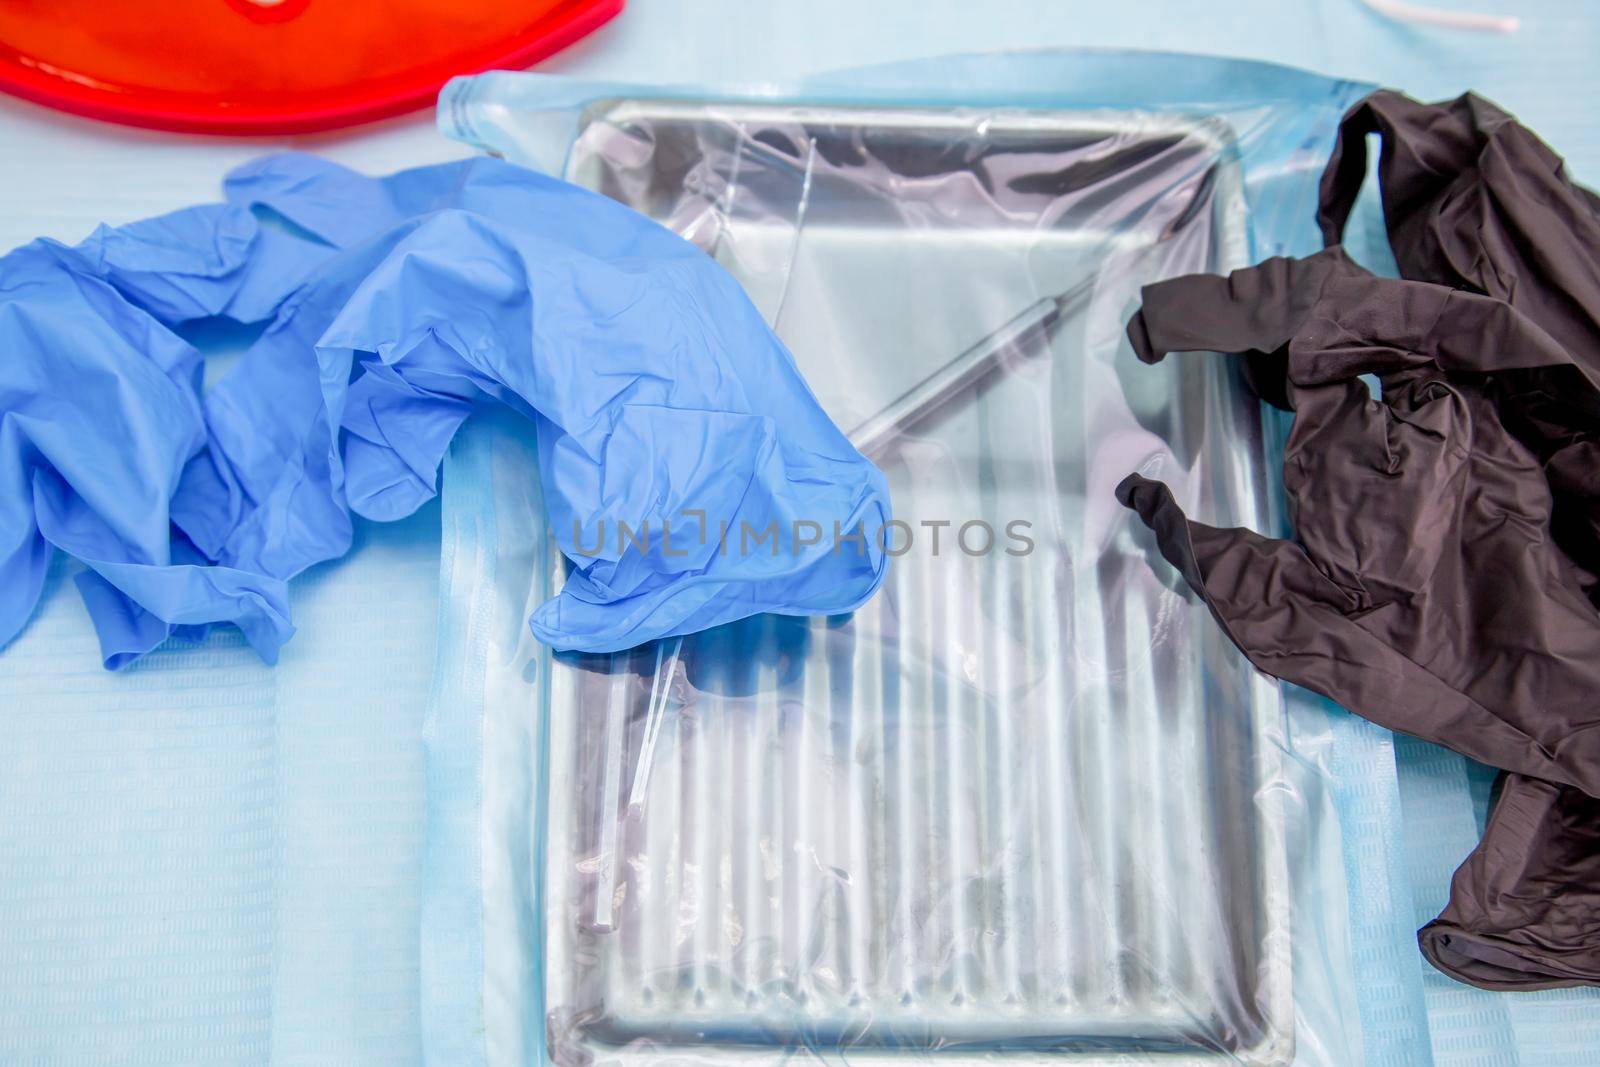 Sterile medical instruments in packaging and blue and black disposable gloves by galinasharapova